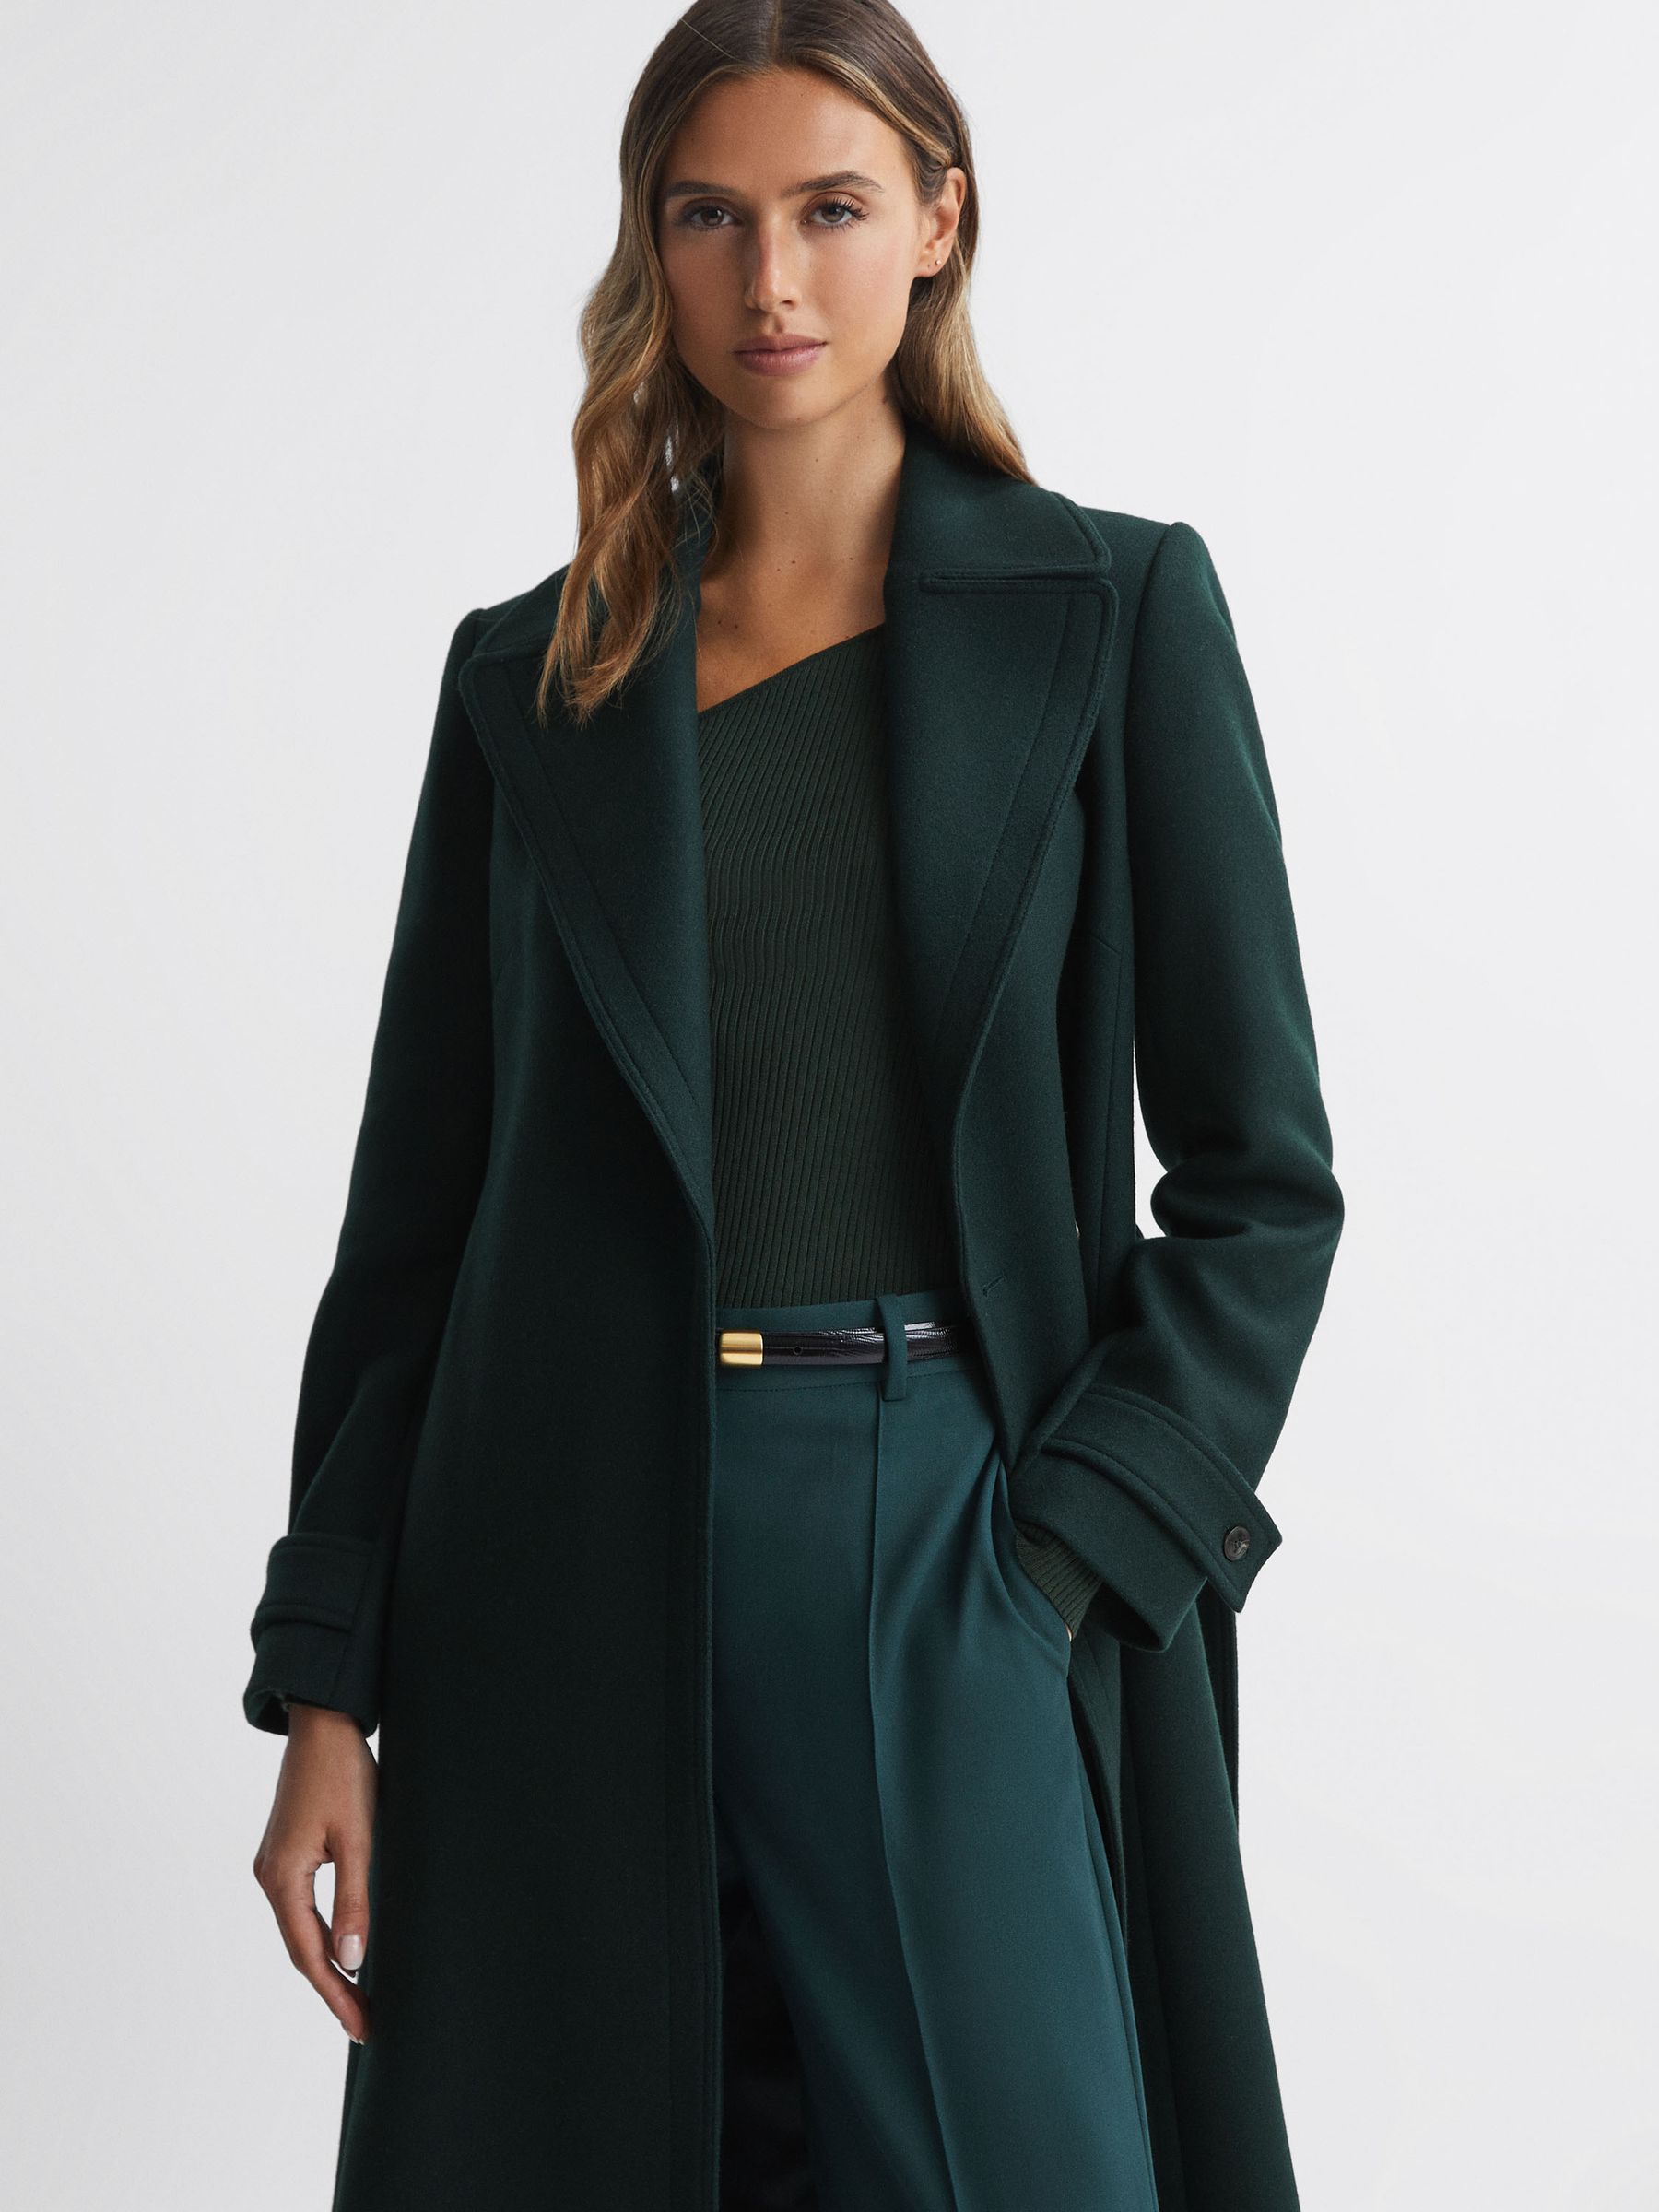 Reiss Tor Relaxed Wool Blend Belted Coat | REISS USA